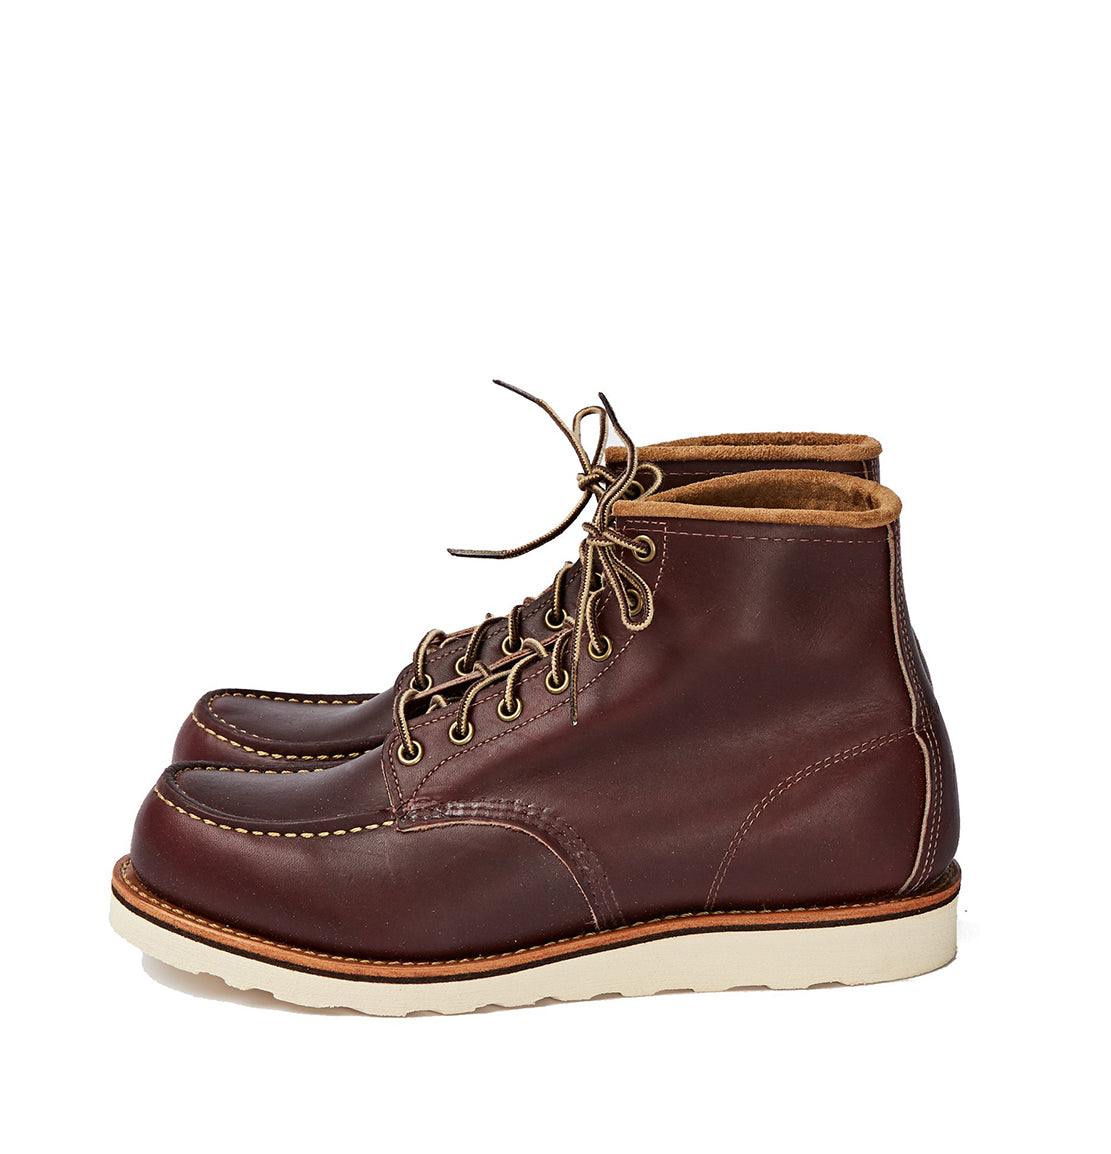 red wing oxblood moc toe